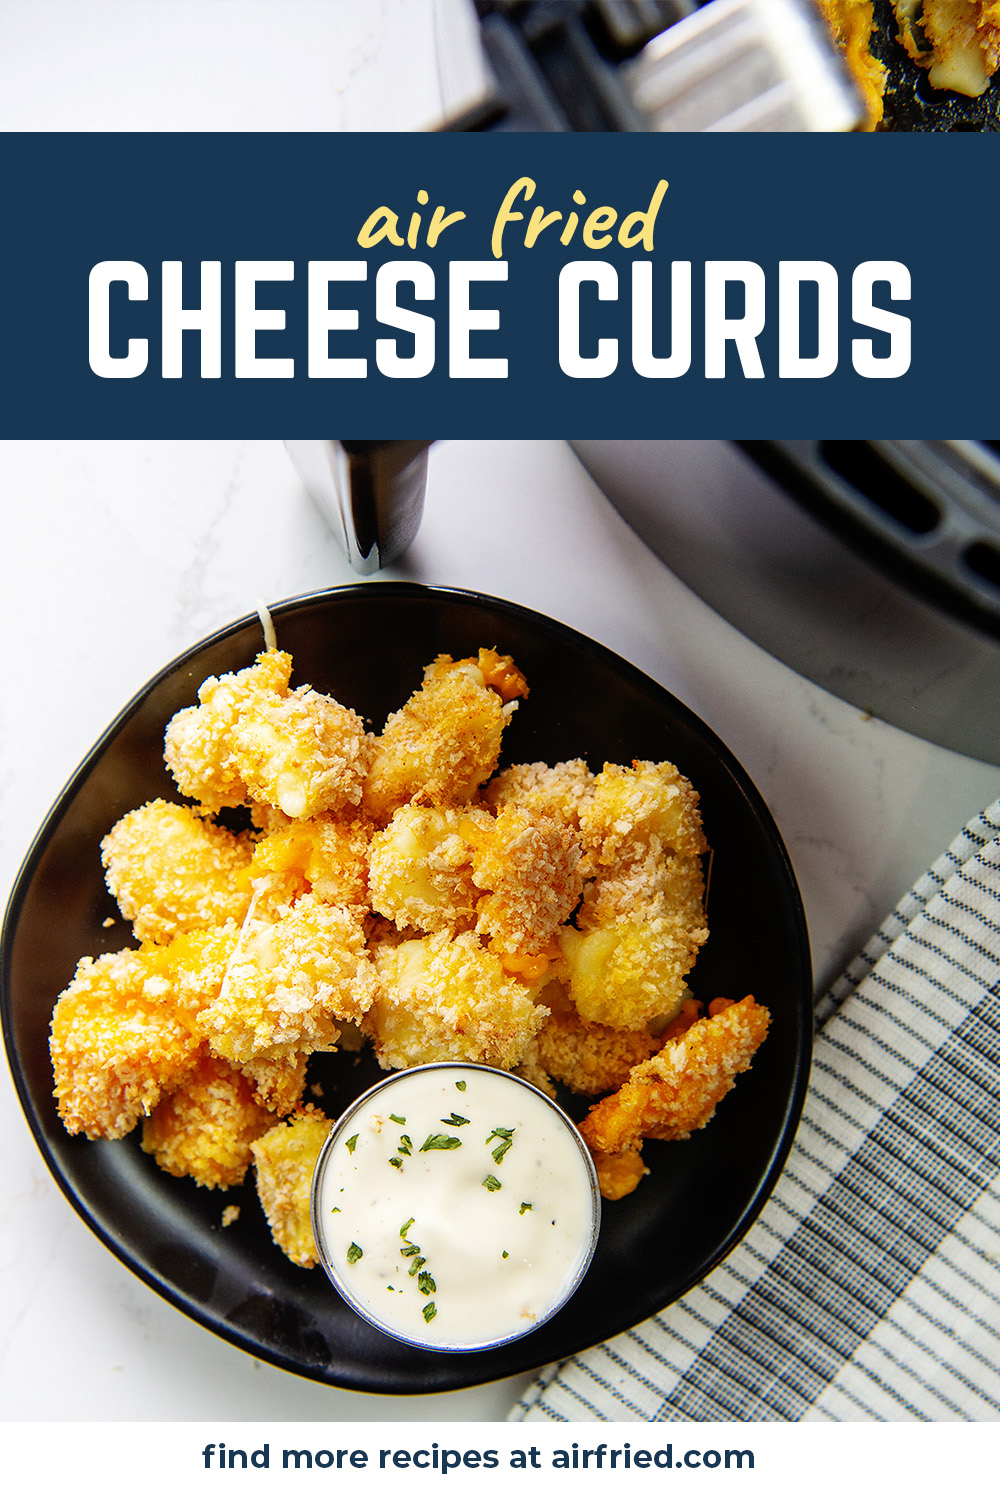 Crispy cheese curds are amazing in the air fryer!  Dipped in ranch dressing this makes one awesome snack!  #cheeseballs #airfried #appetizers